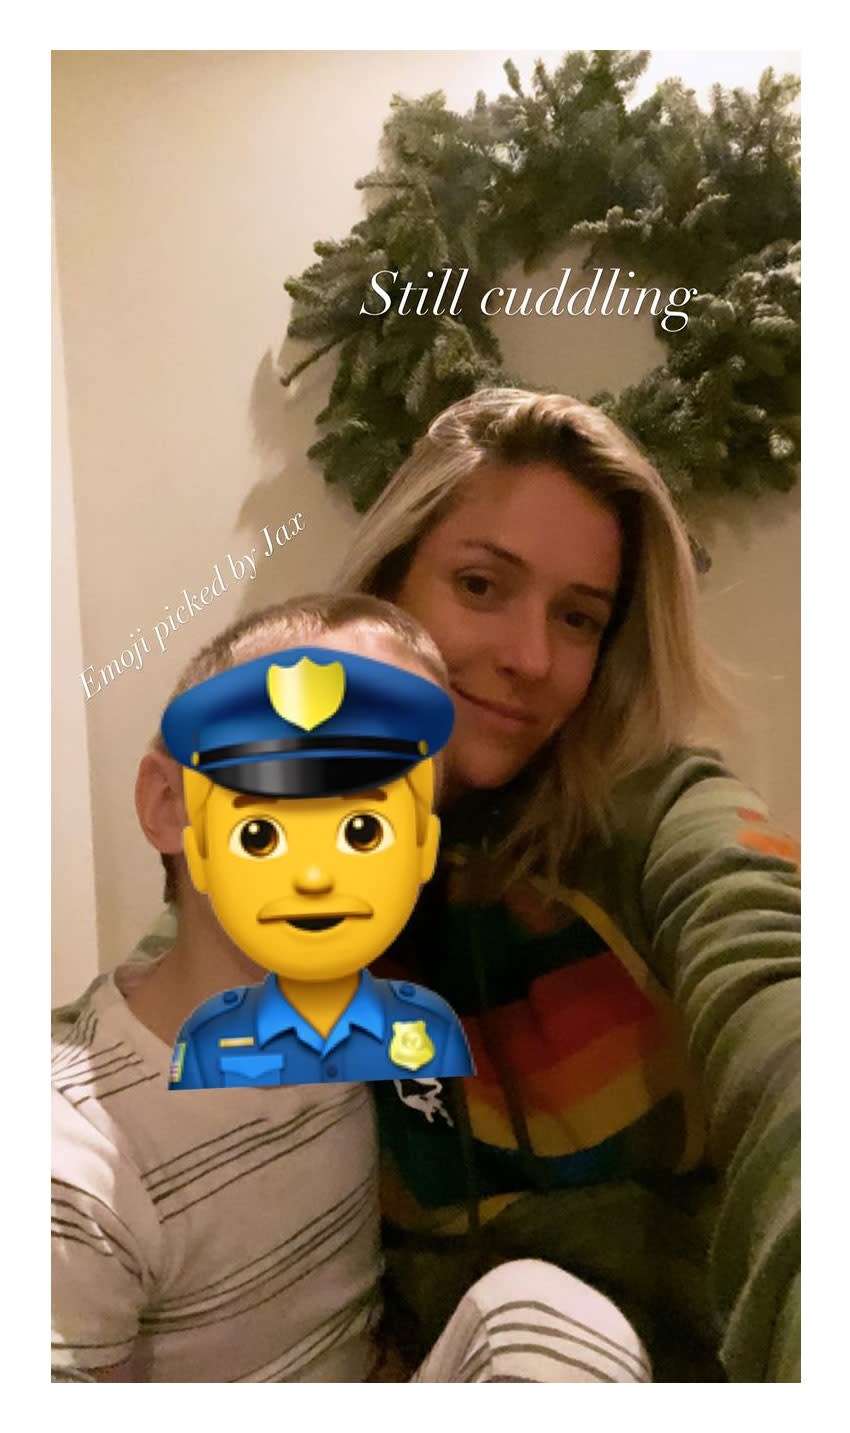 Cavallari snapped a selfie while enjoying "movies and cuddles" with Jaxon, covering his face with an emoji.